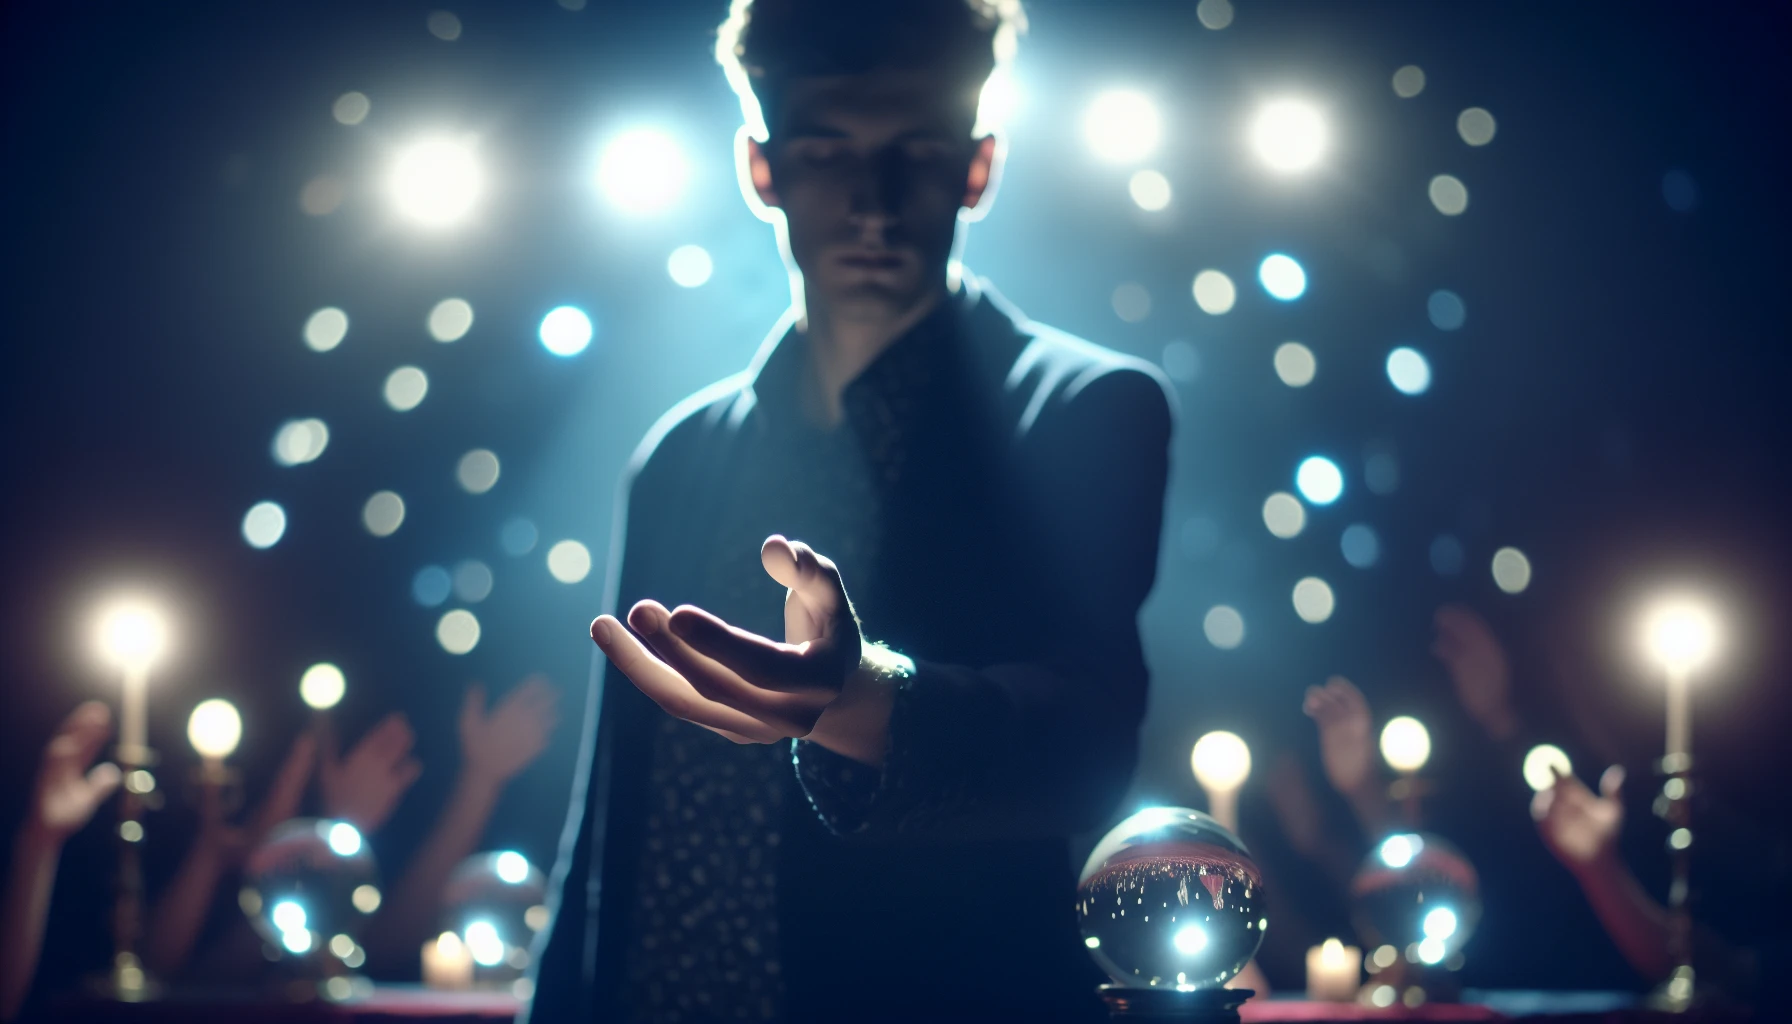 Illustration of a person performing mentalism with blurred crystal balls in the background